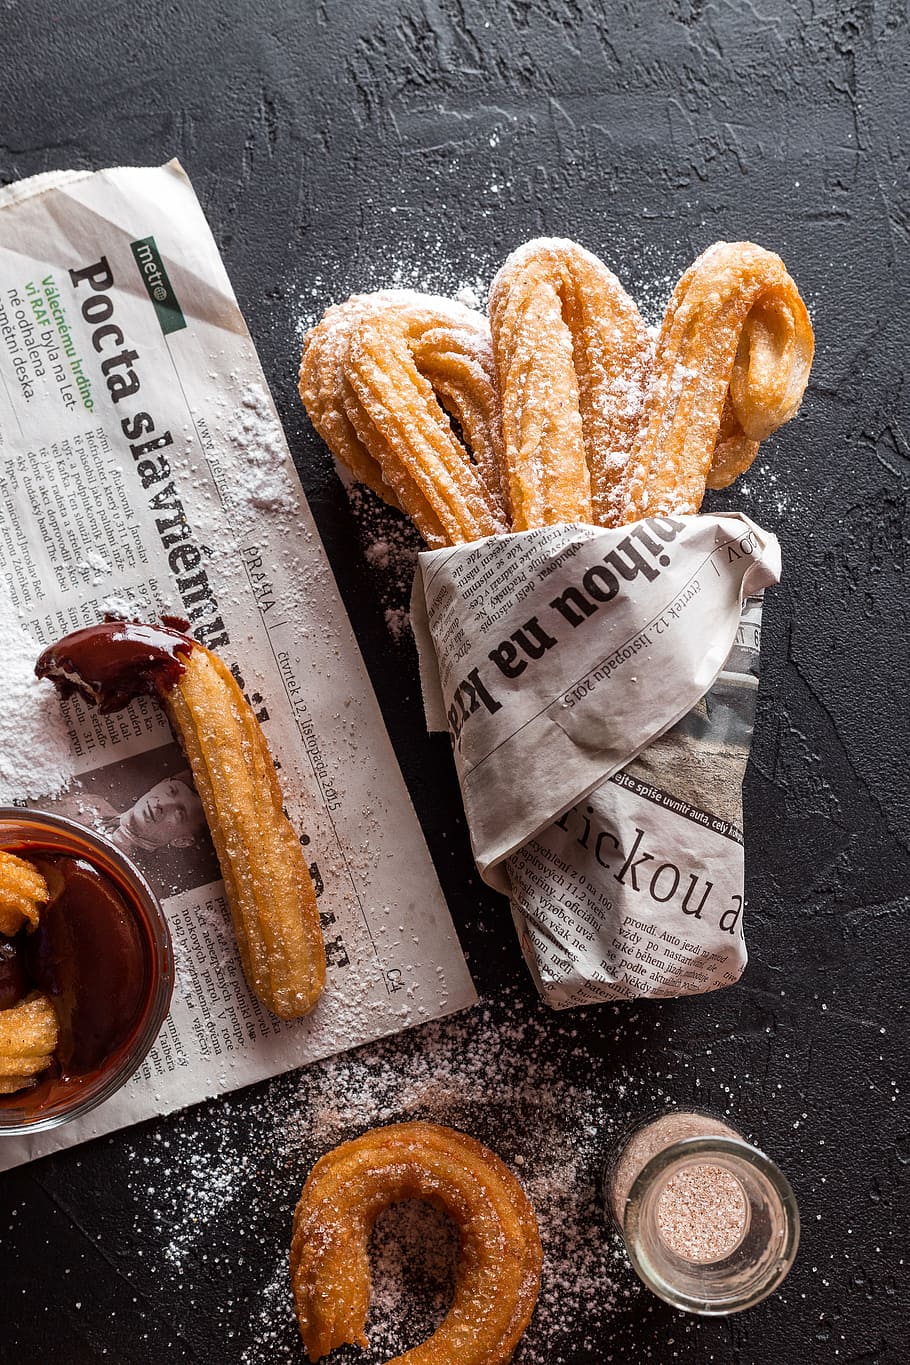 HD wallpaper: baked bread food coated with newspaper, churros, baking, cookies